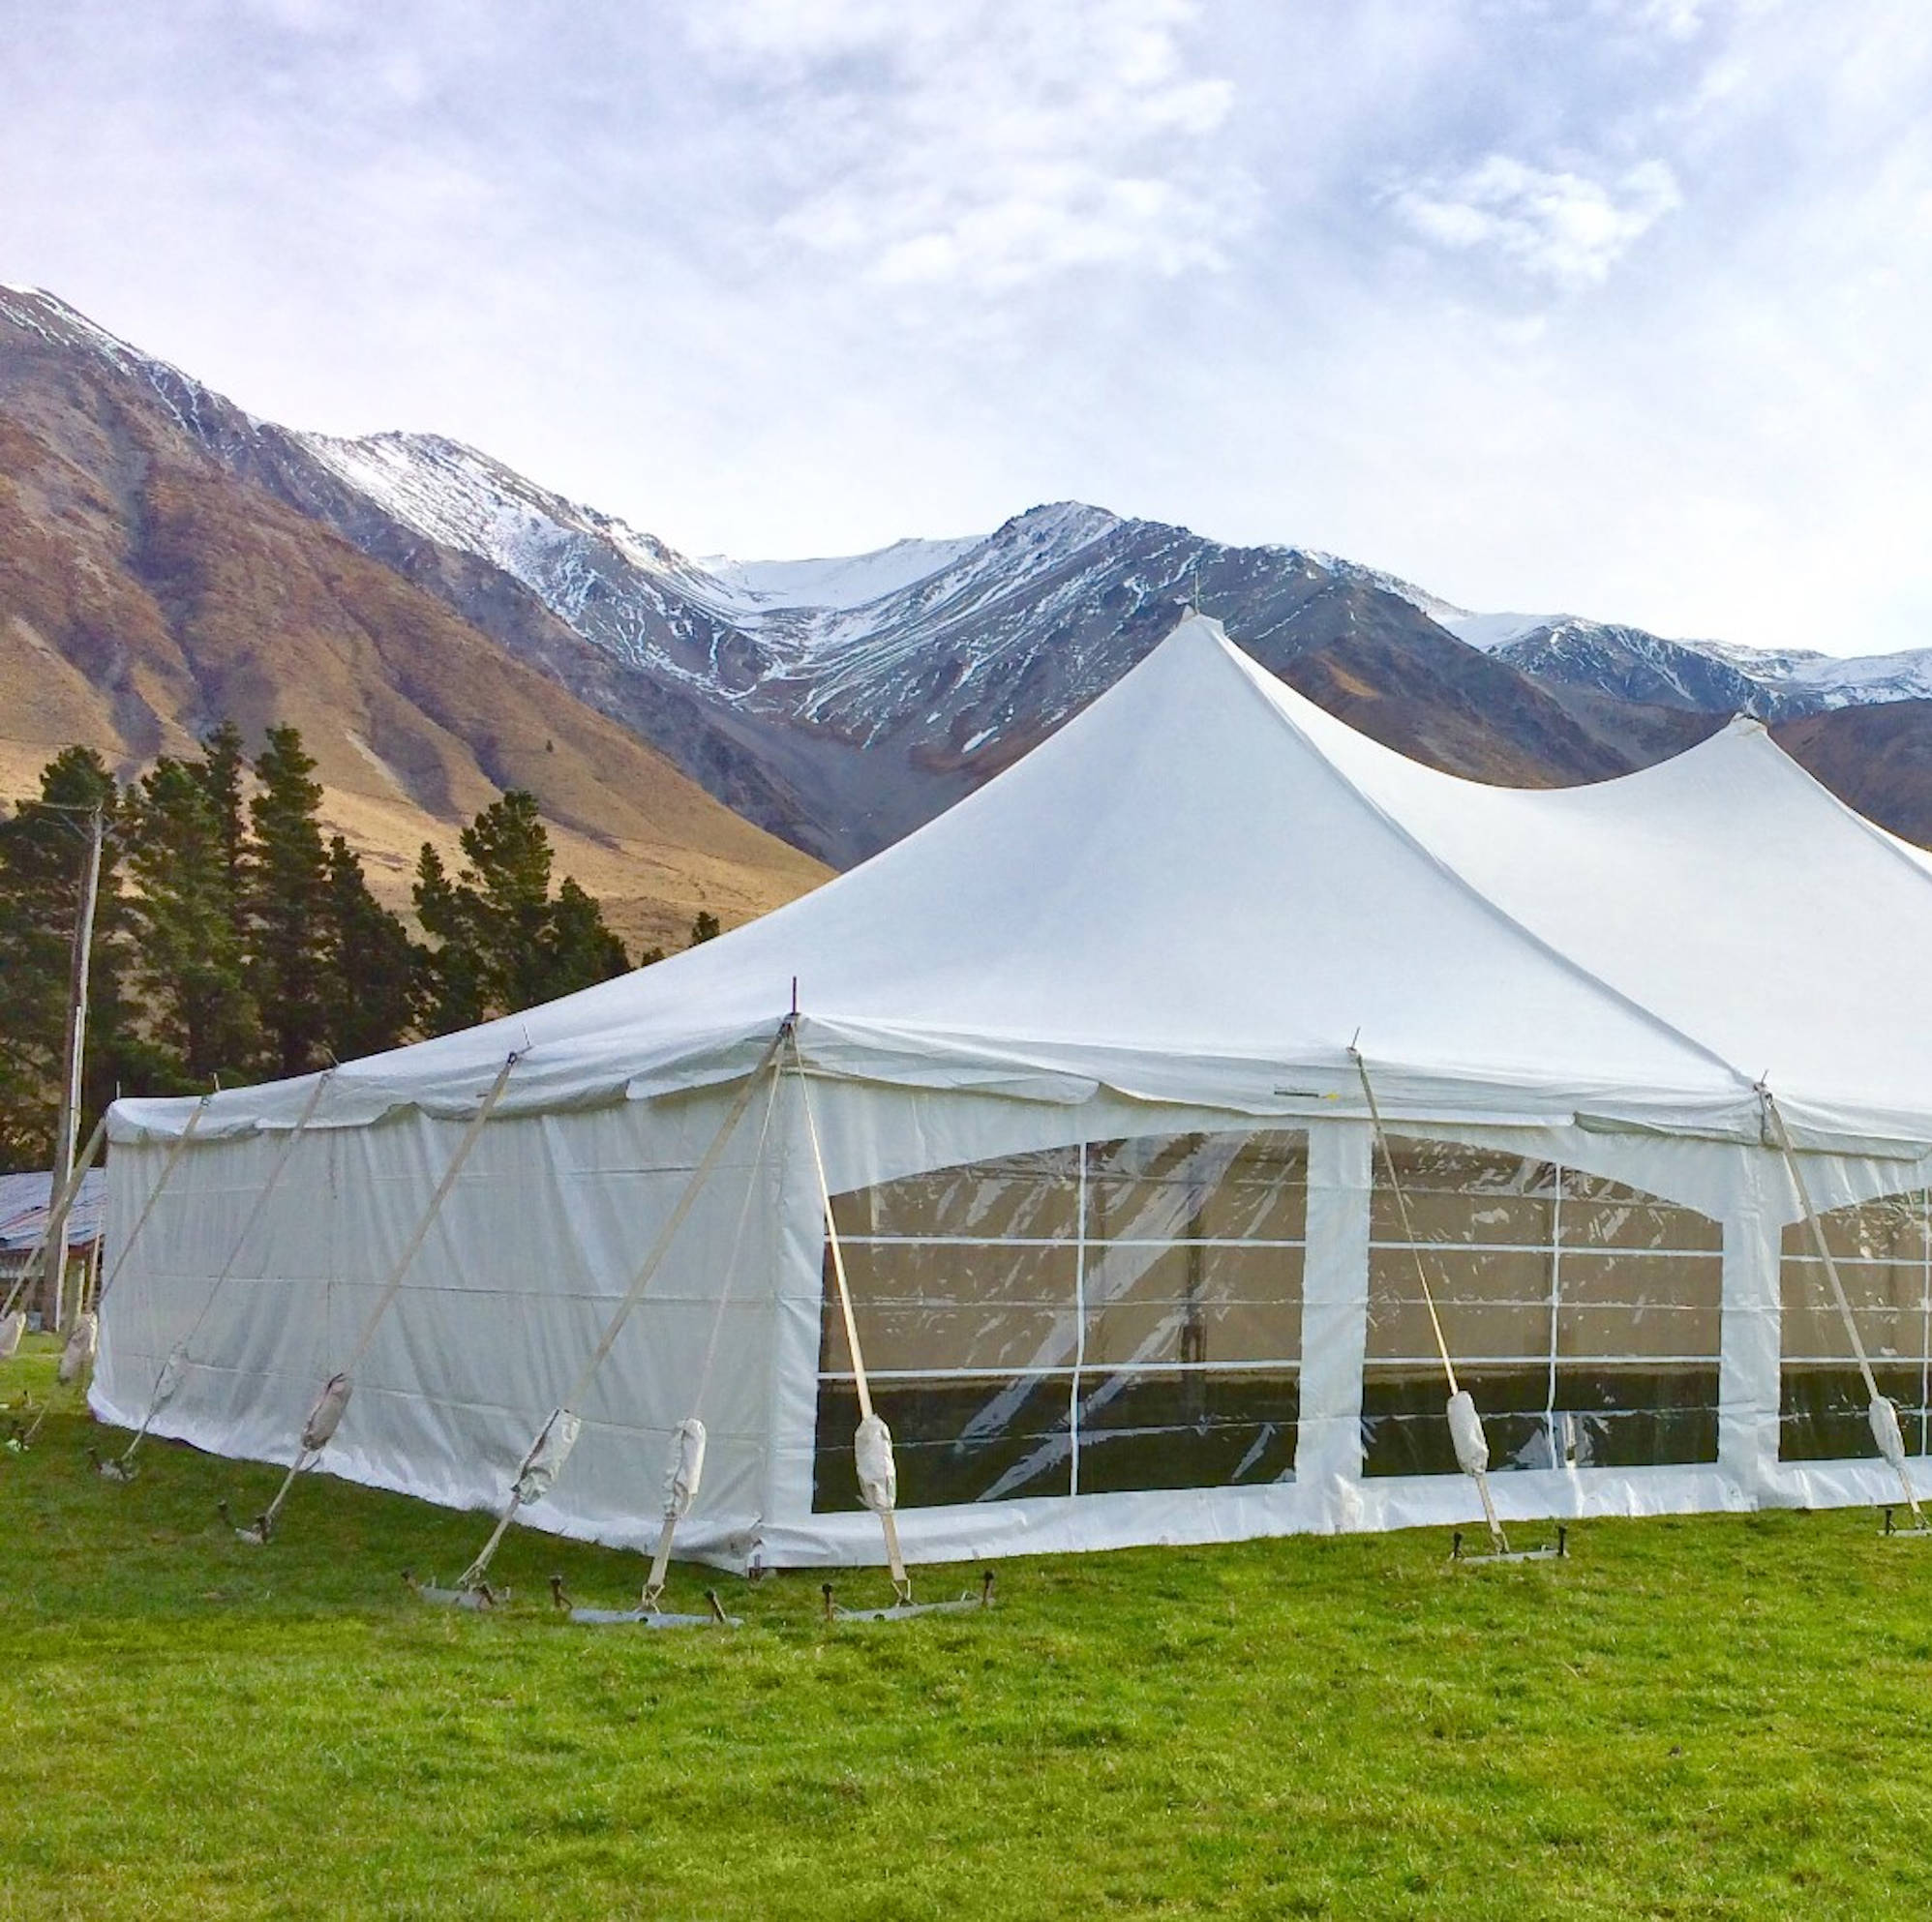 Party Warehouse hire a large selection of marquees to help make your event memorable